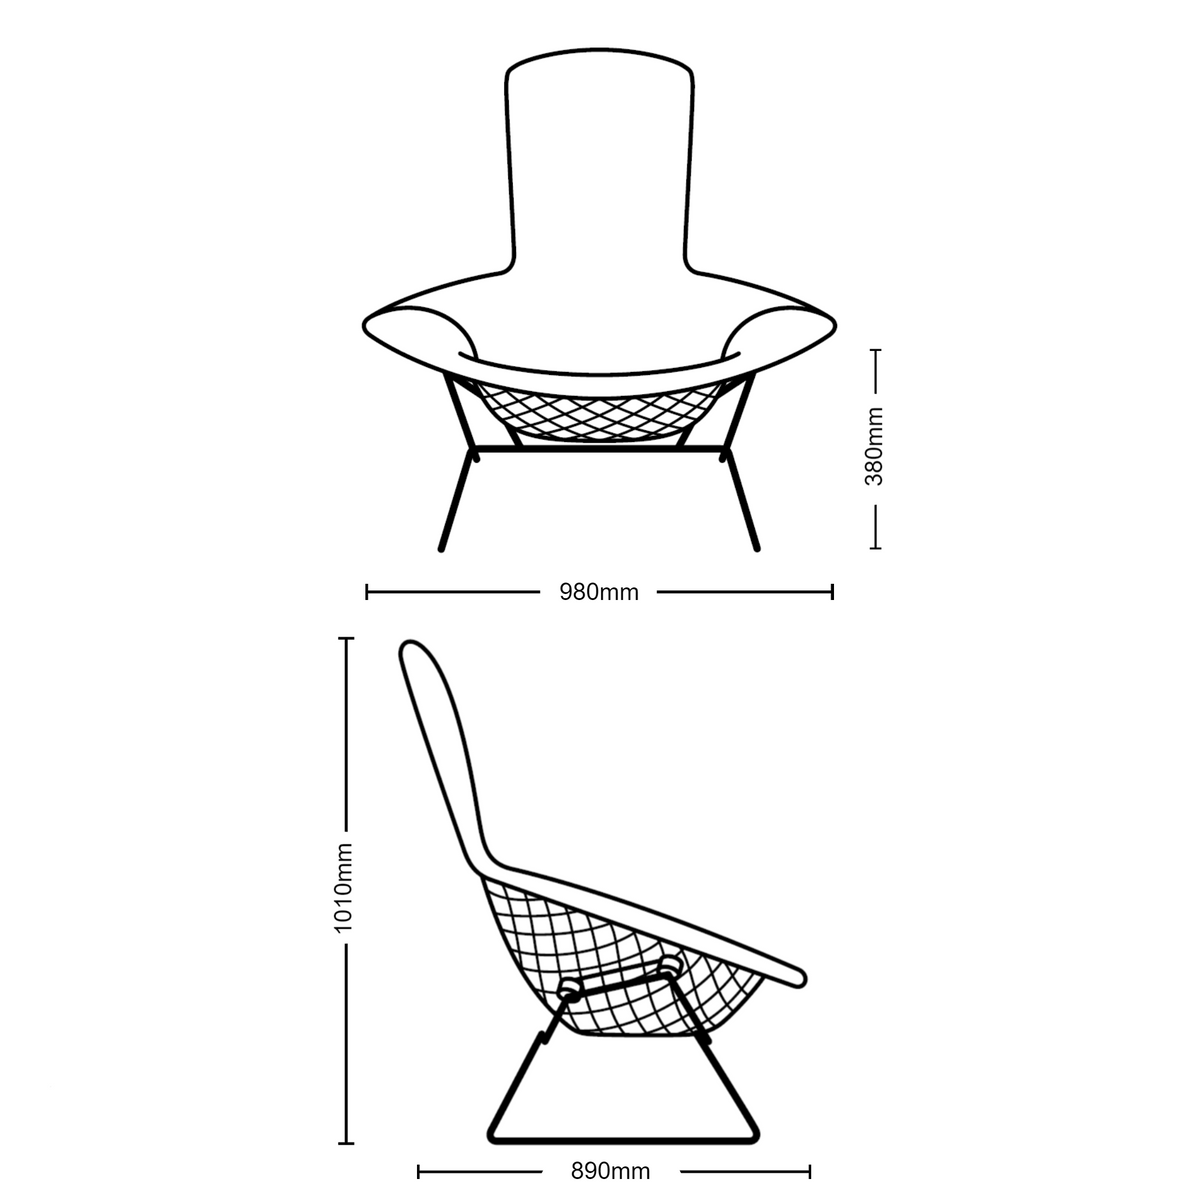 Dimensions for Knoll Bertoia Bird Lounge Chair